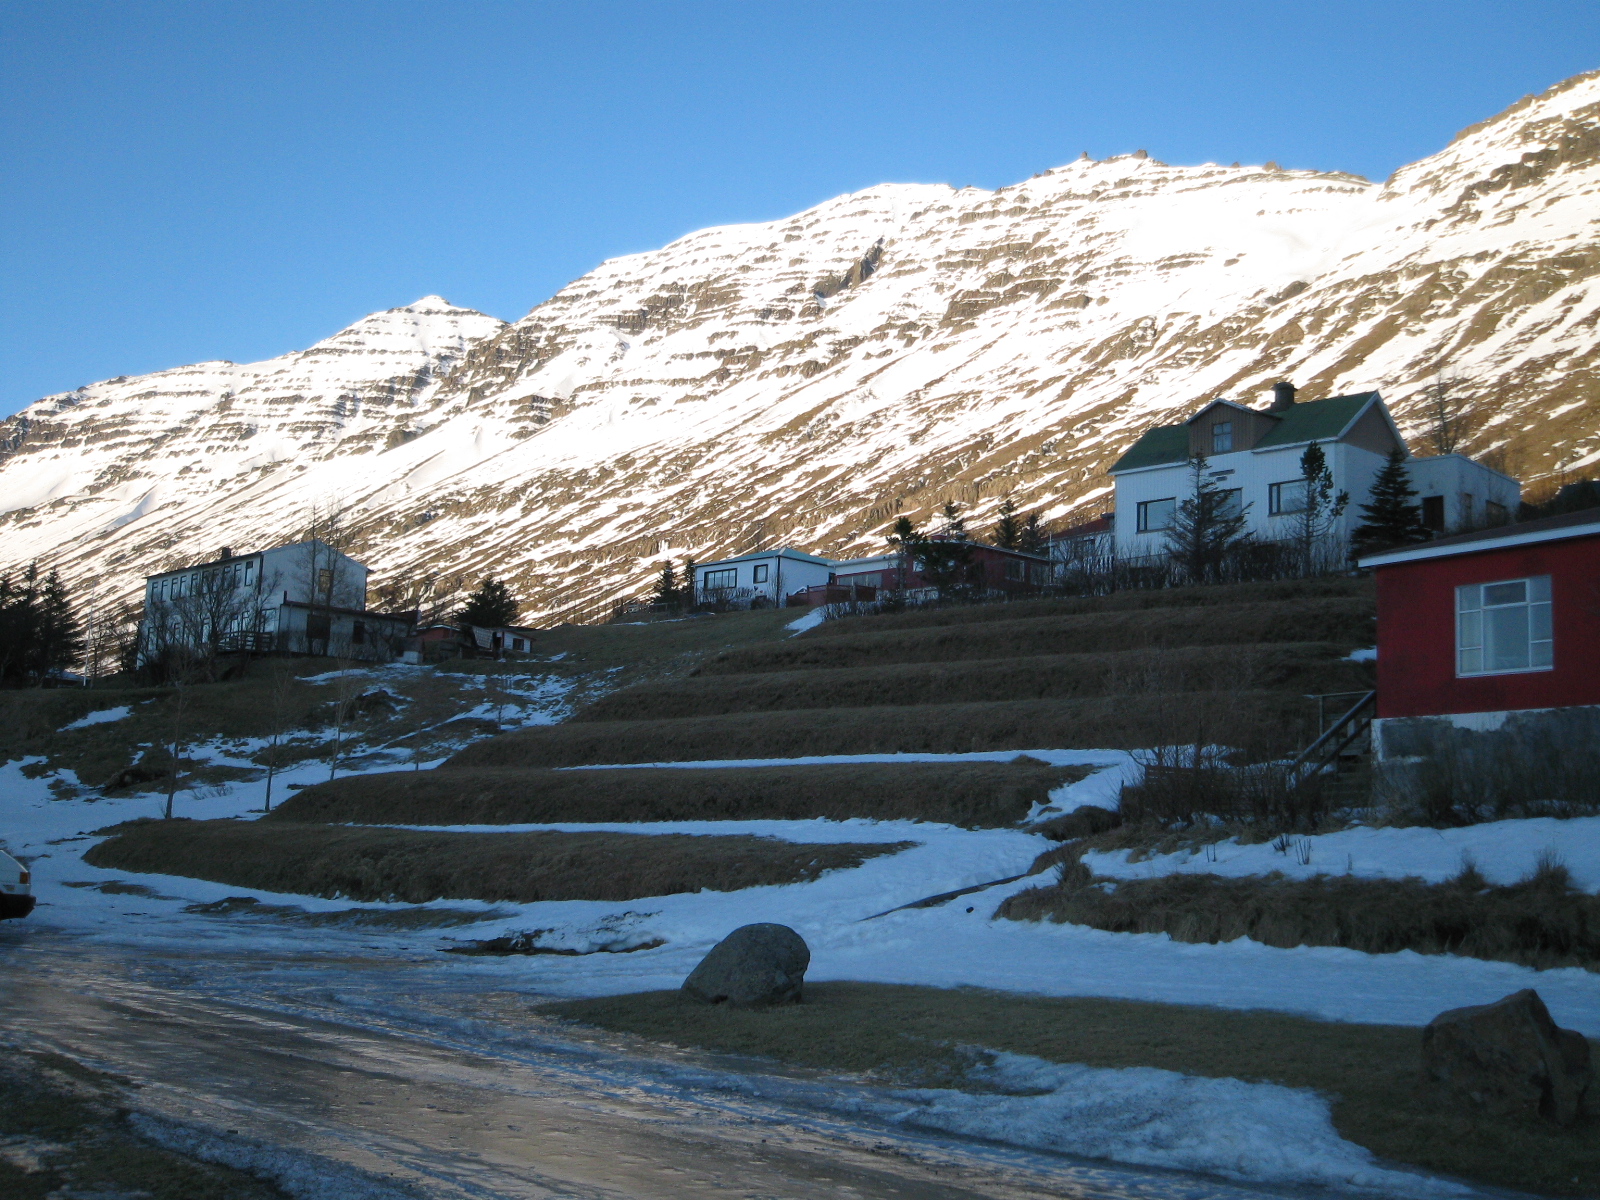 Neskaupstadur is a fjord and town in Iceland.